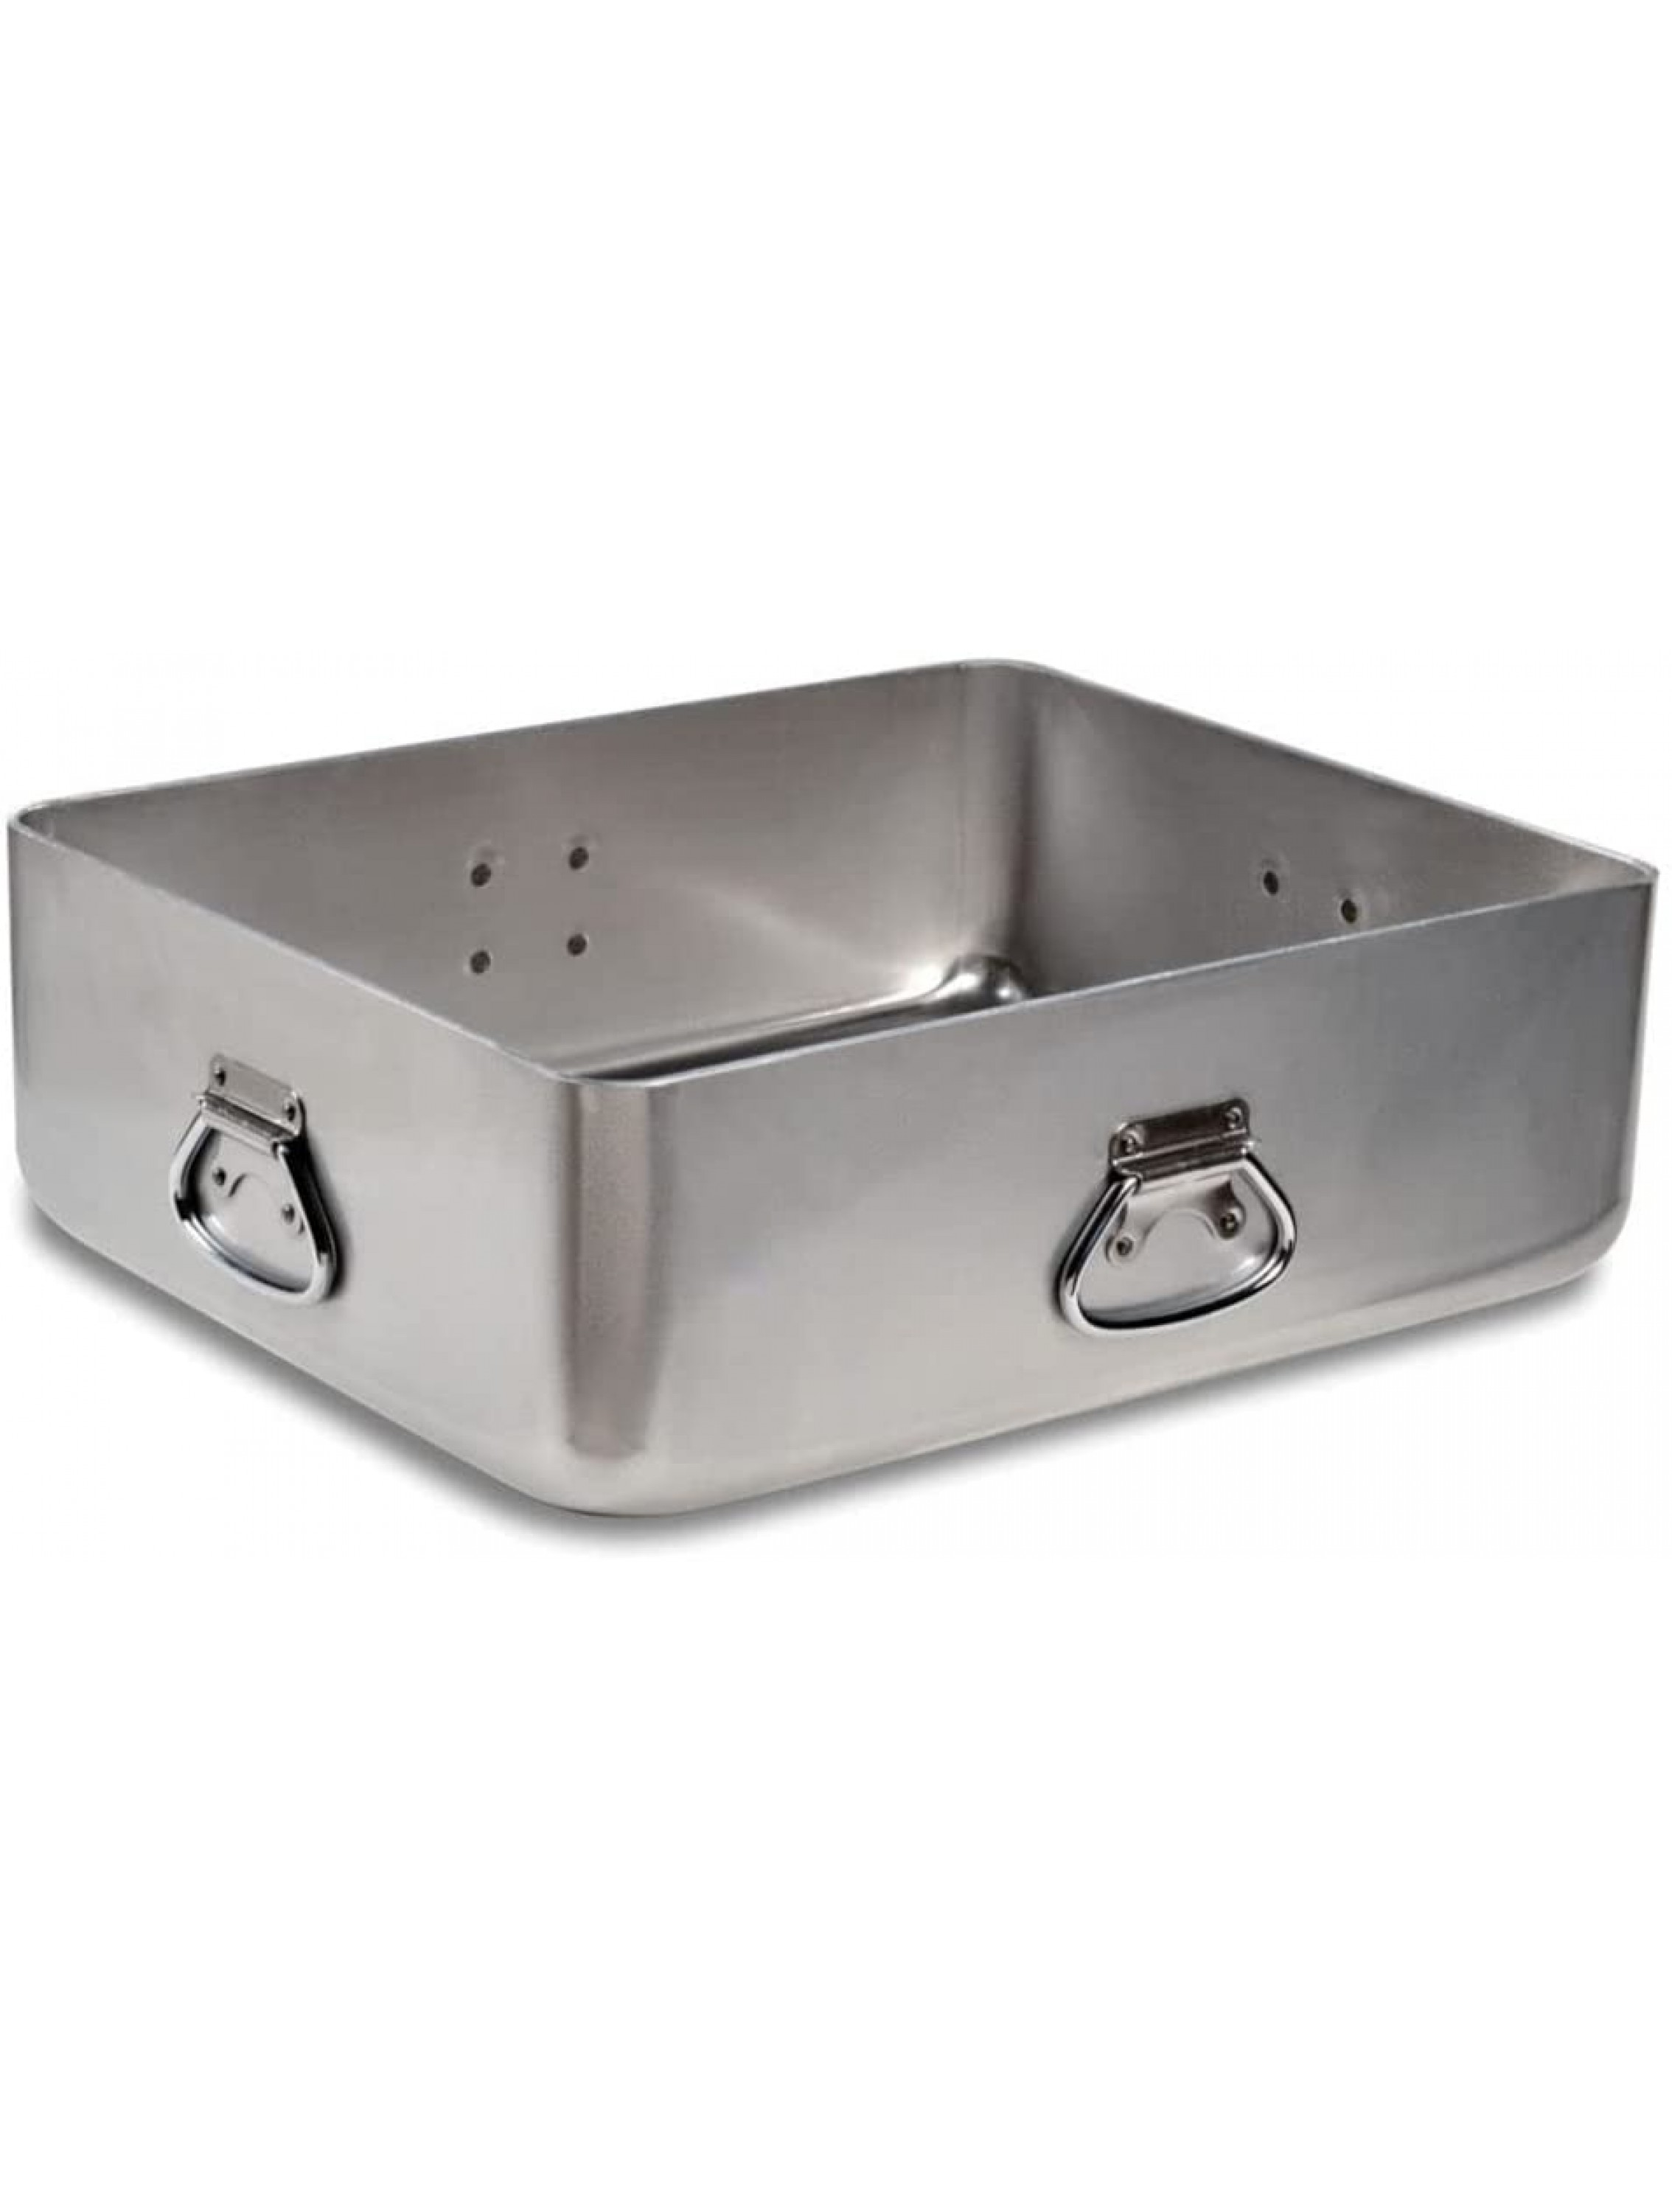 Extra Heavy Gauge Aluminum Roaster. Handles on All Four Sides 21 x 17 X 7 High. Optional Cover: See Item #68392 - B36YQ185P